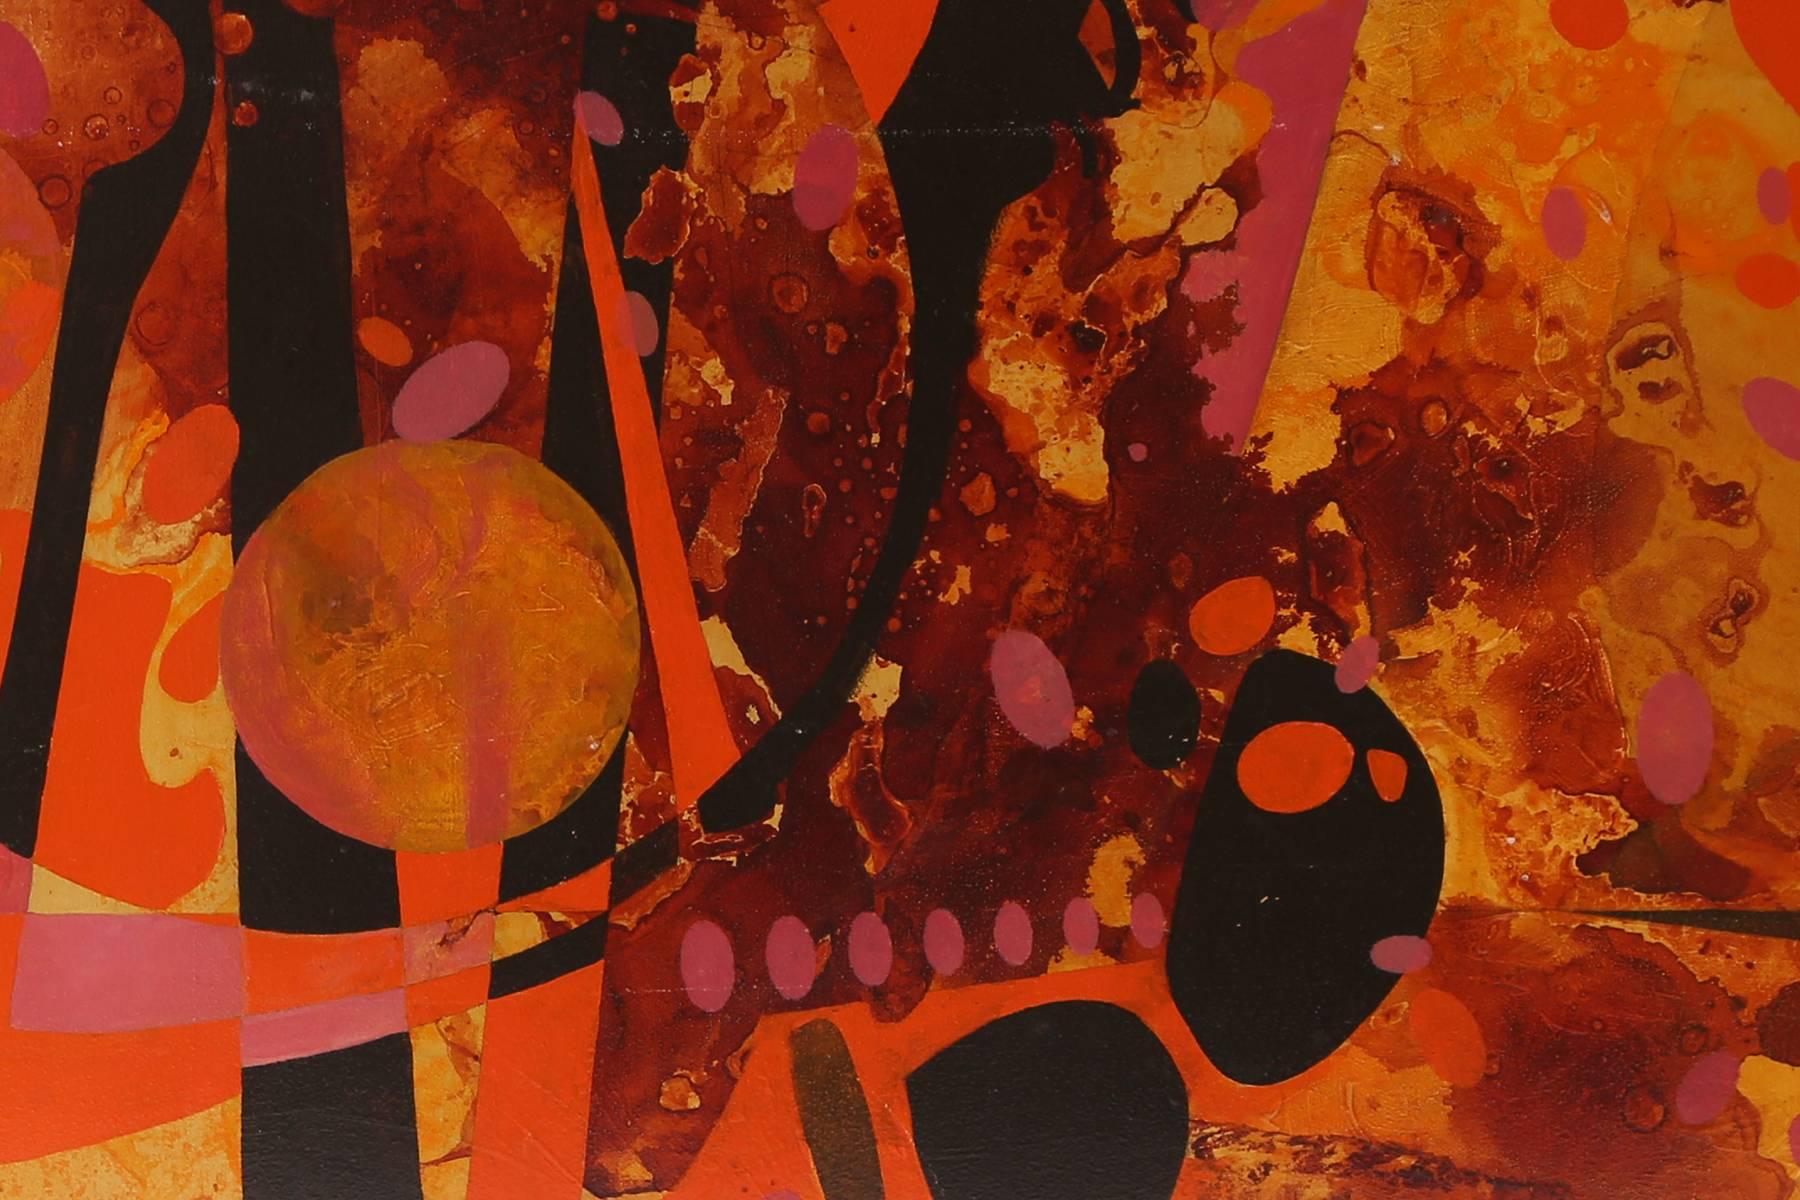 Large scale acrylic on board painting by Jim Proctor, circa late 1960s. This example has vibrant hues of oranges yellows and blacks and has compositional depth and great flow. This was purchased directly from Proctor's estate.